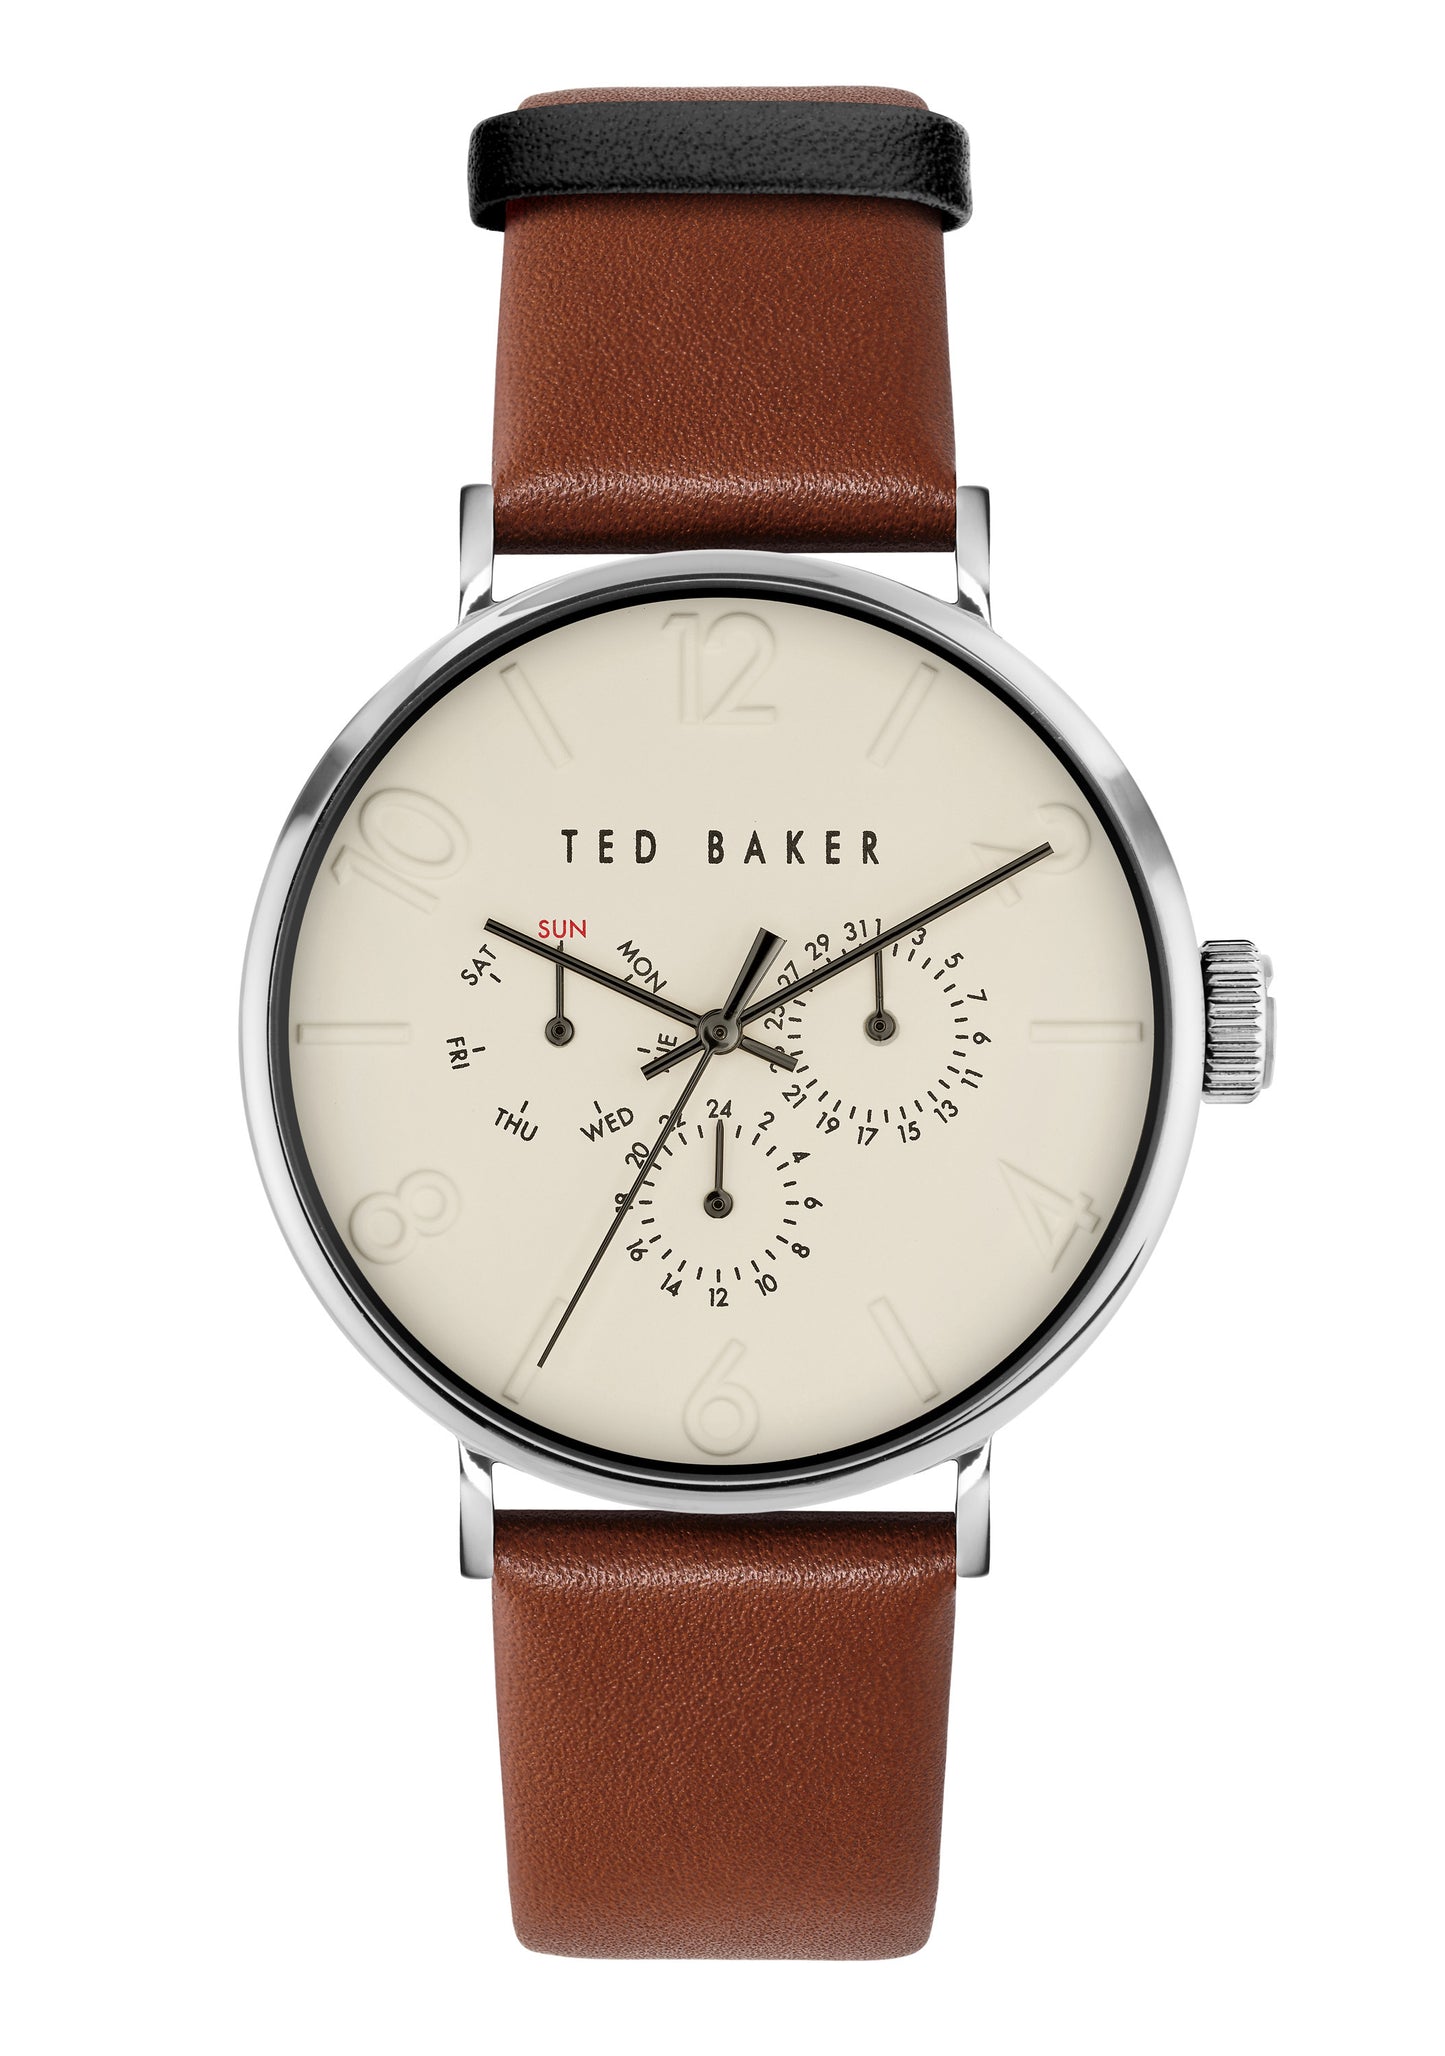 Ted Baker White Dial Men Watch - BKPPGF202